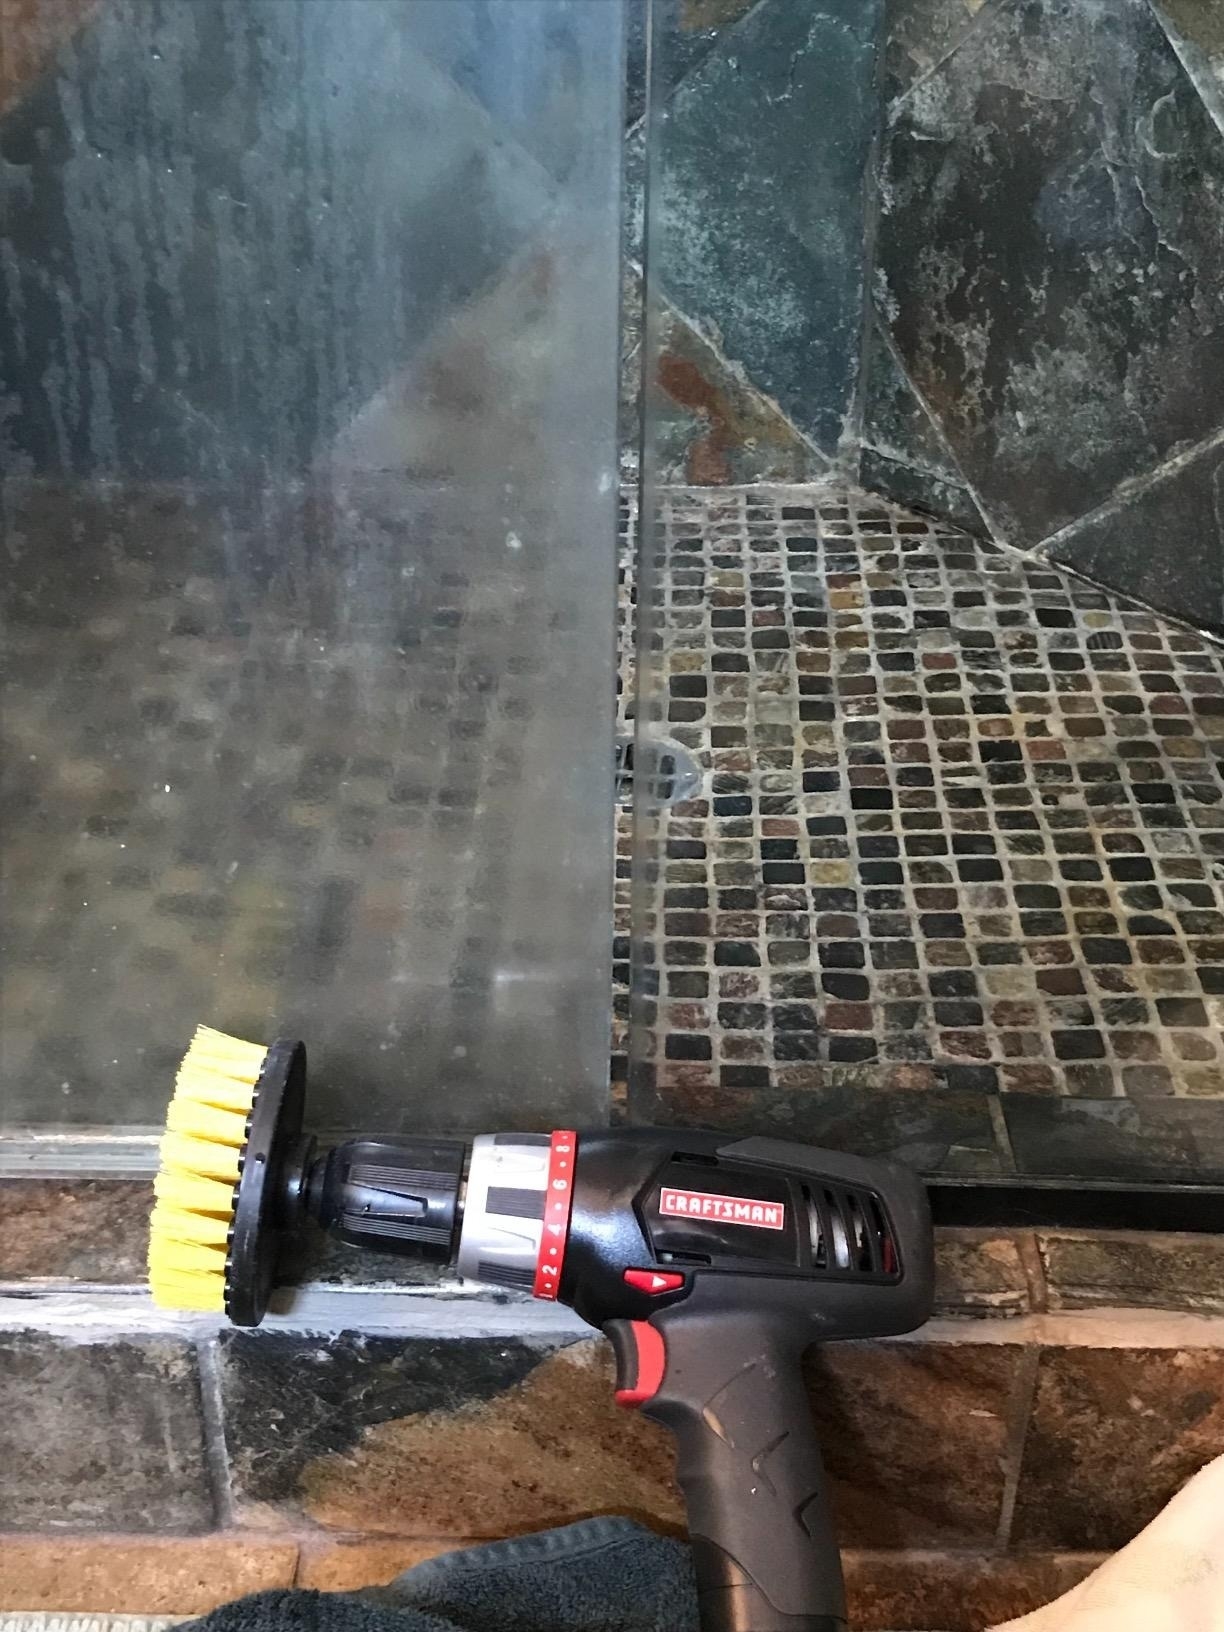 How to Get a Cleaner Kitchen in Half the Time Using a Drillbrush Power